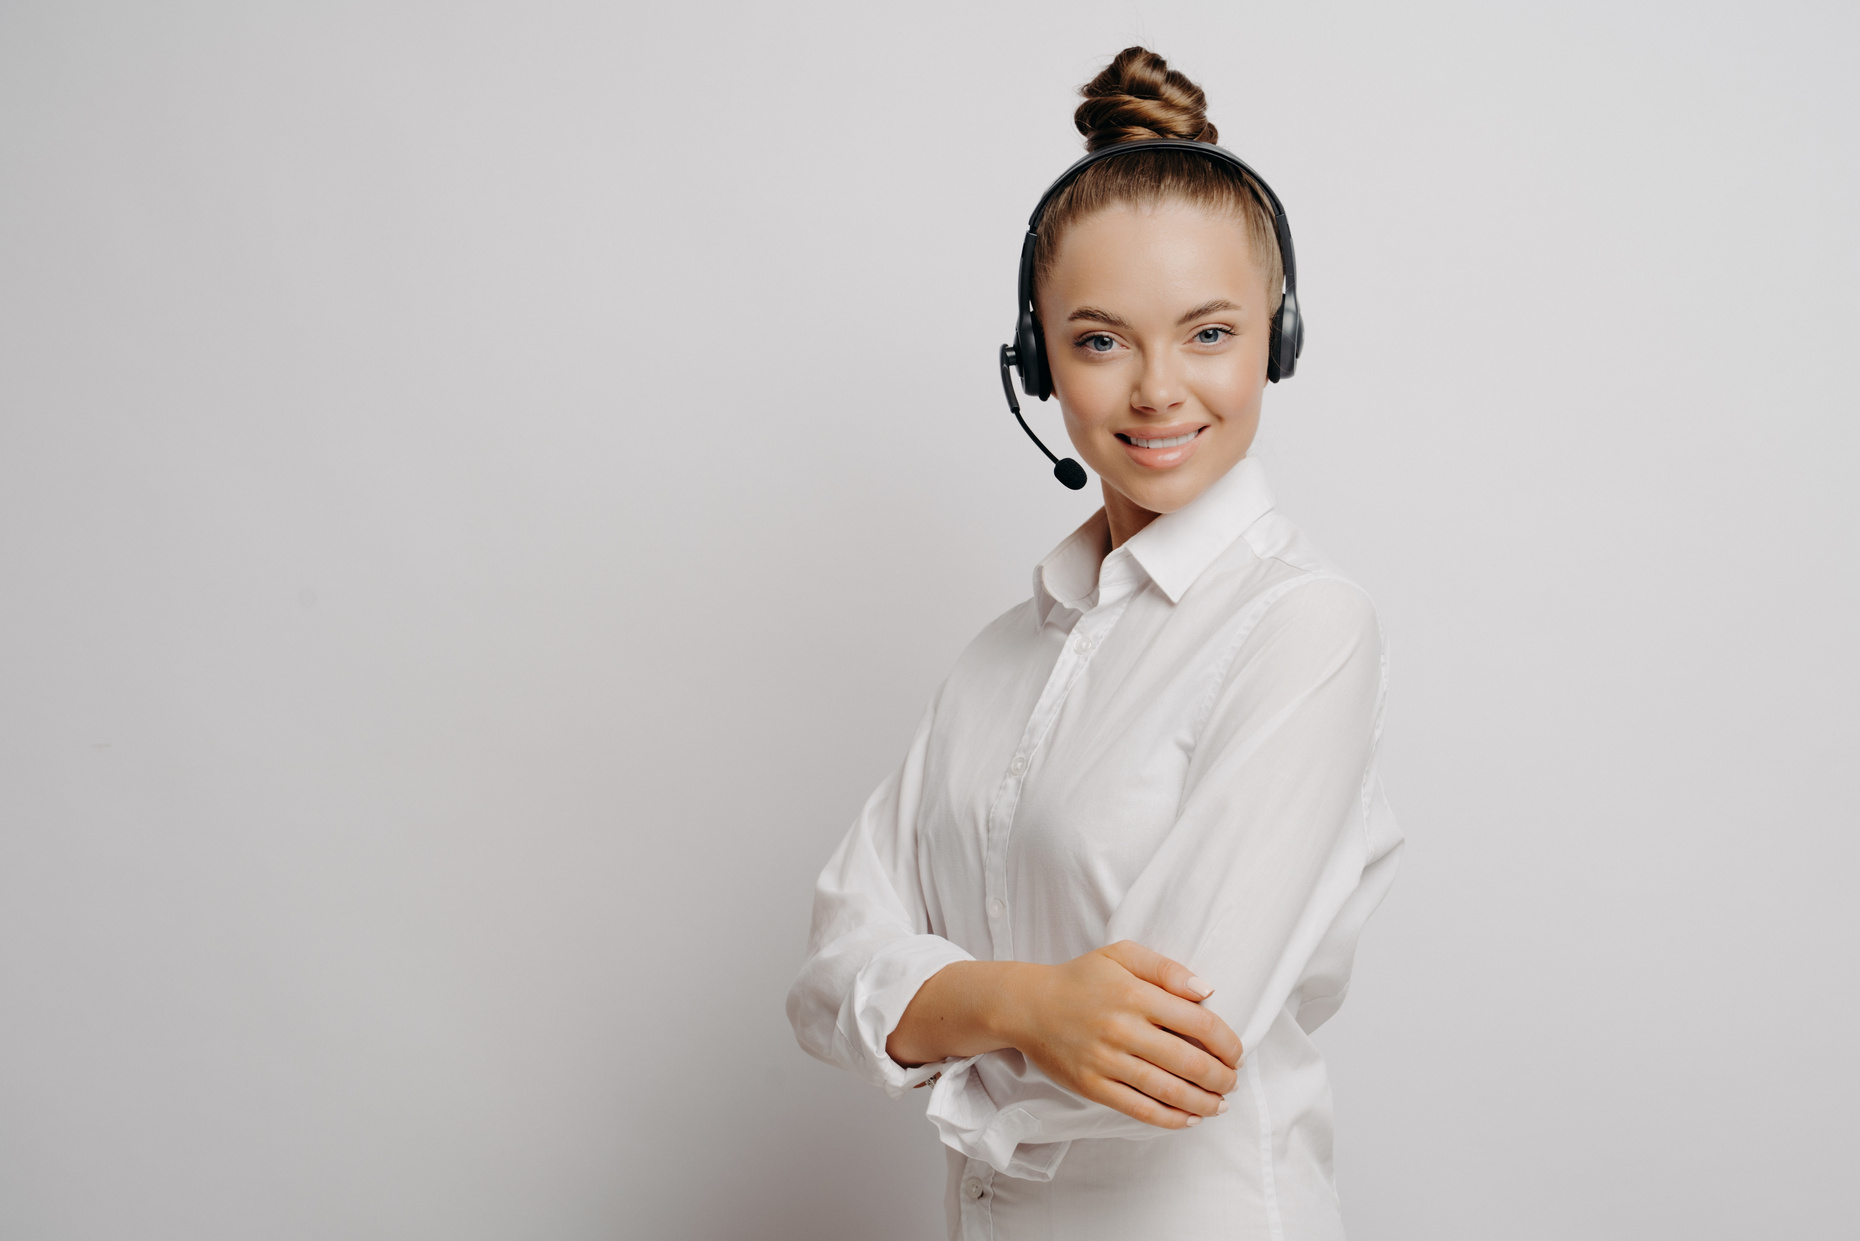 Female call center agent with black headset and crossed arms